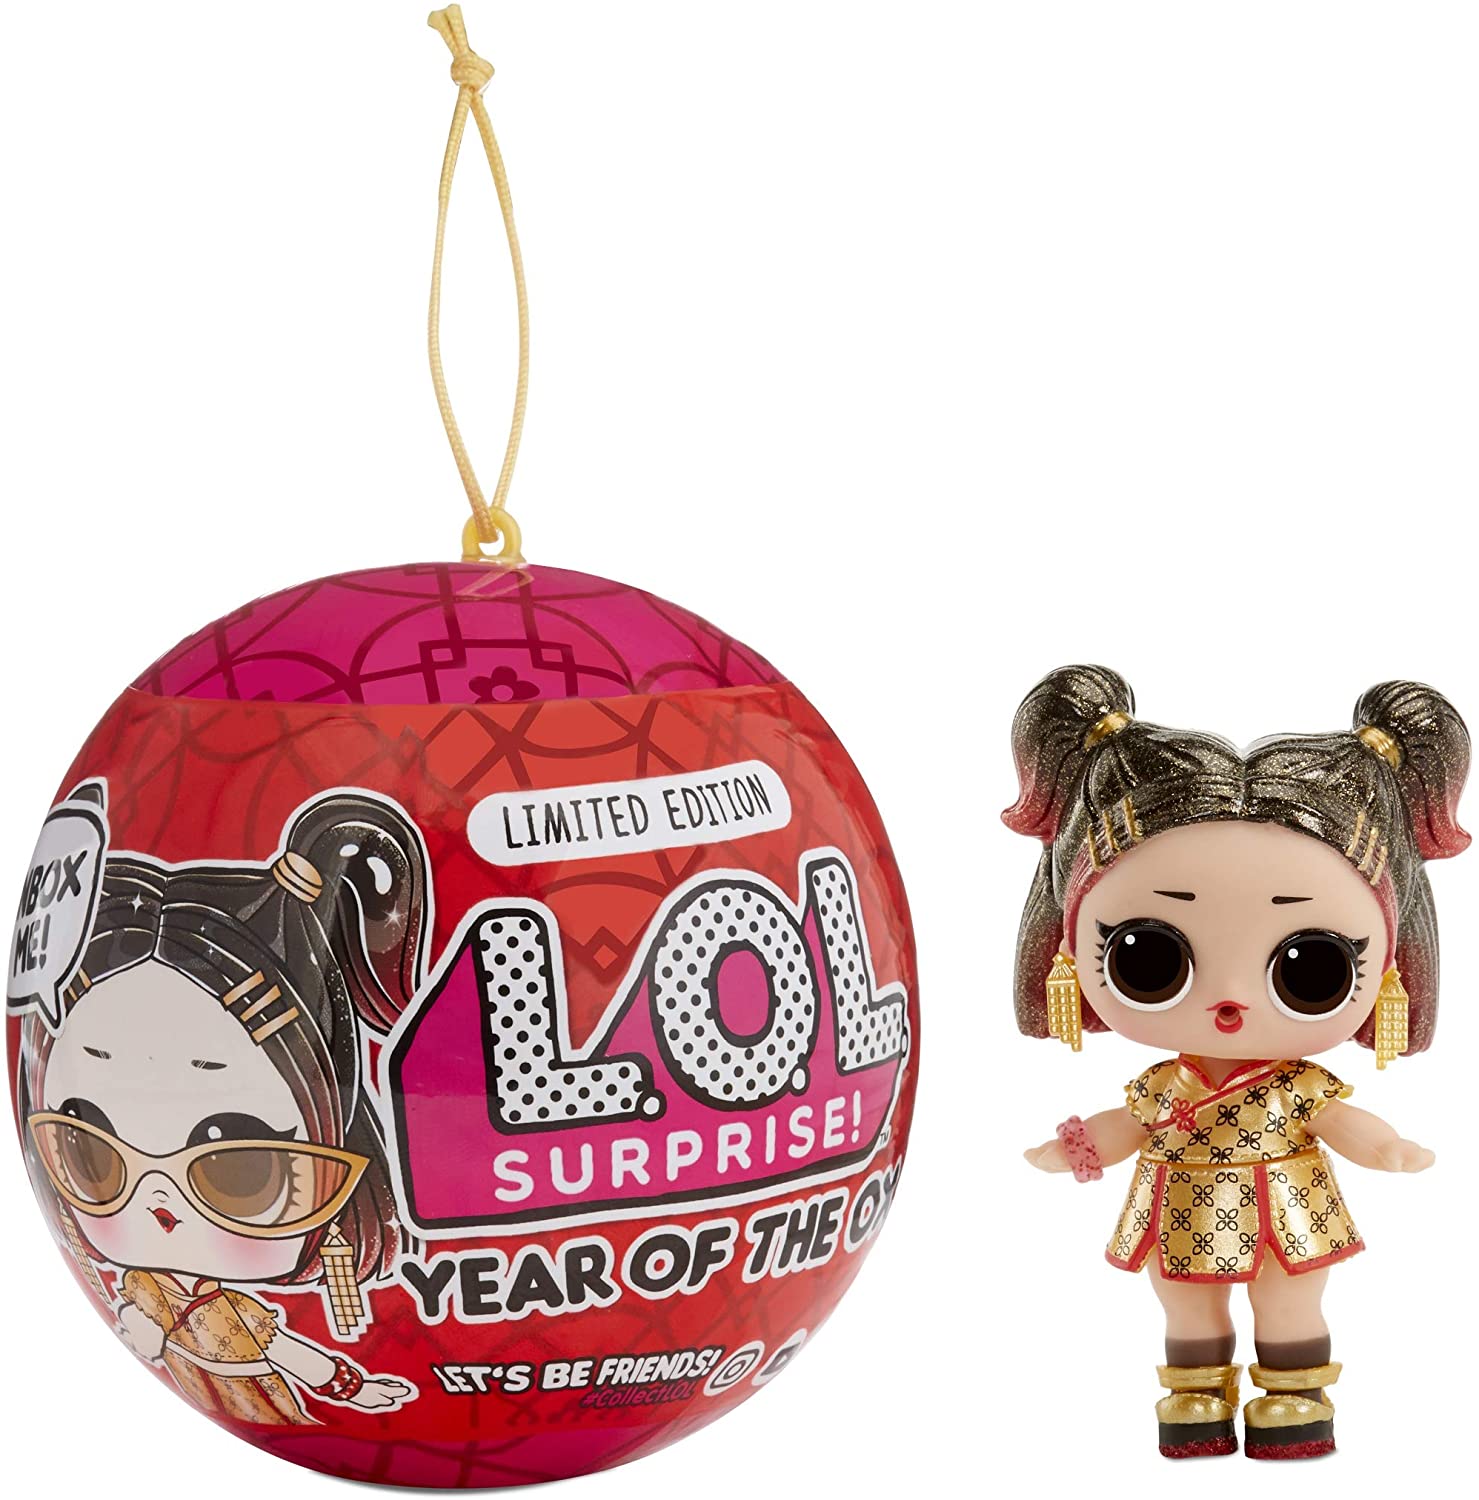 LOL Surprise Year of The Ox Doll or Pet w/ 7 Surprises $4.94 + Free Store Pickup at Target, FS on $35+ or FS w/ Amazon Prime, FS on $25+